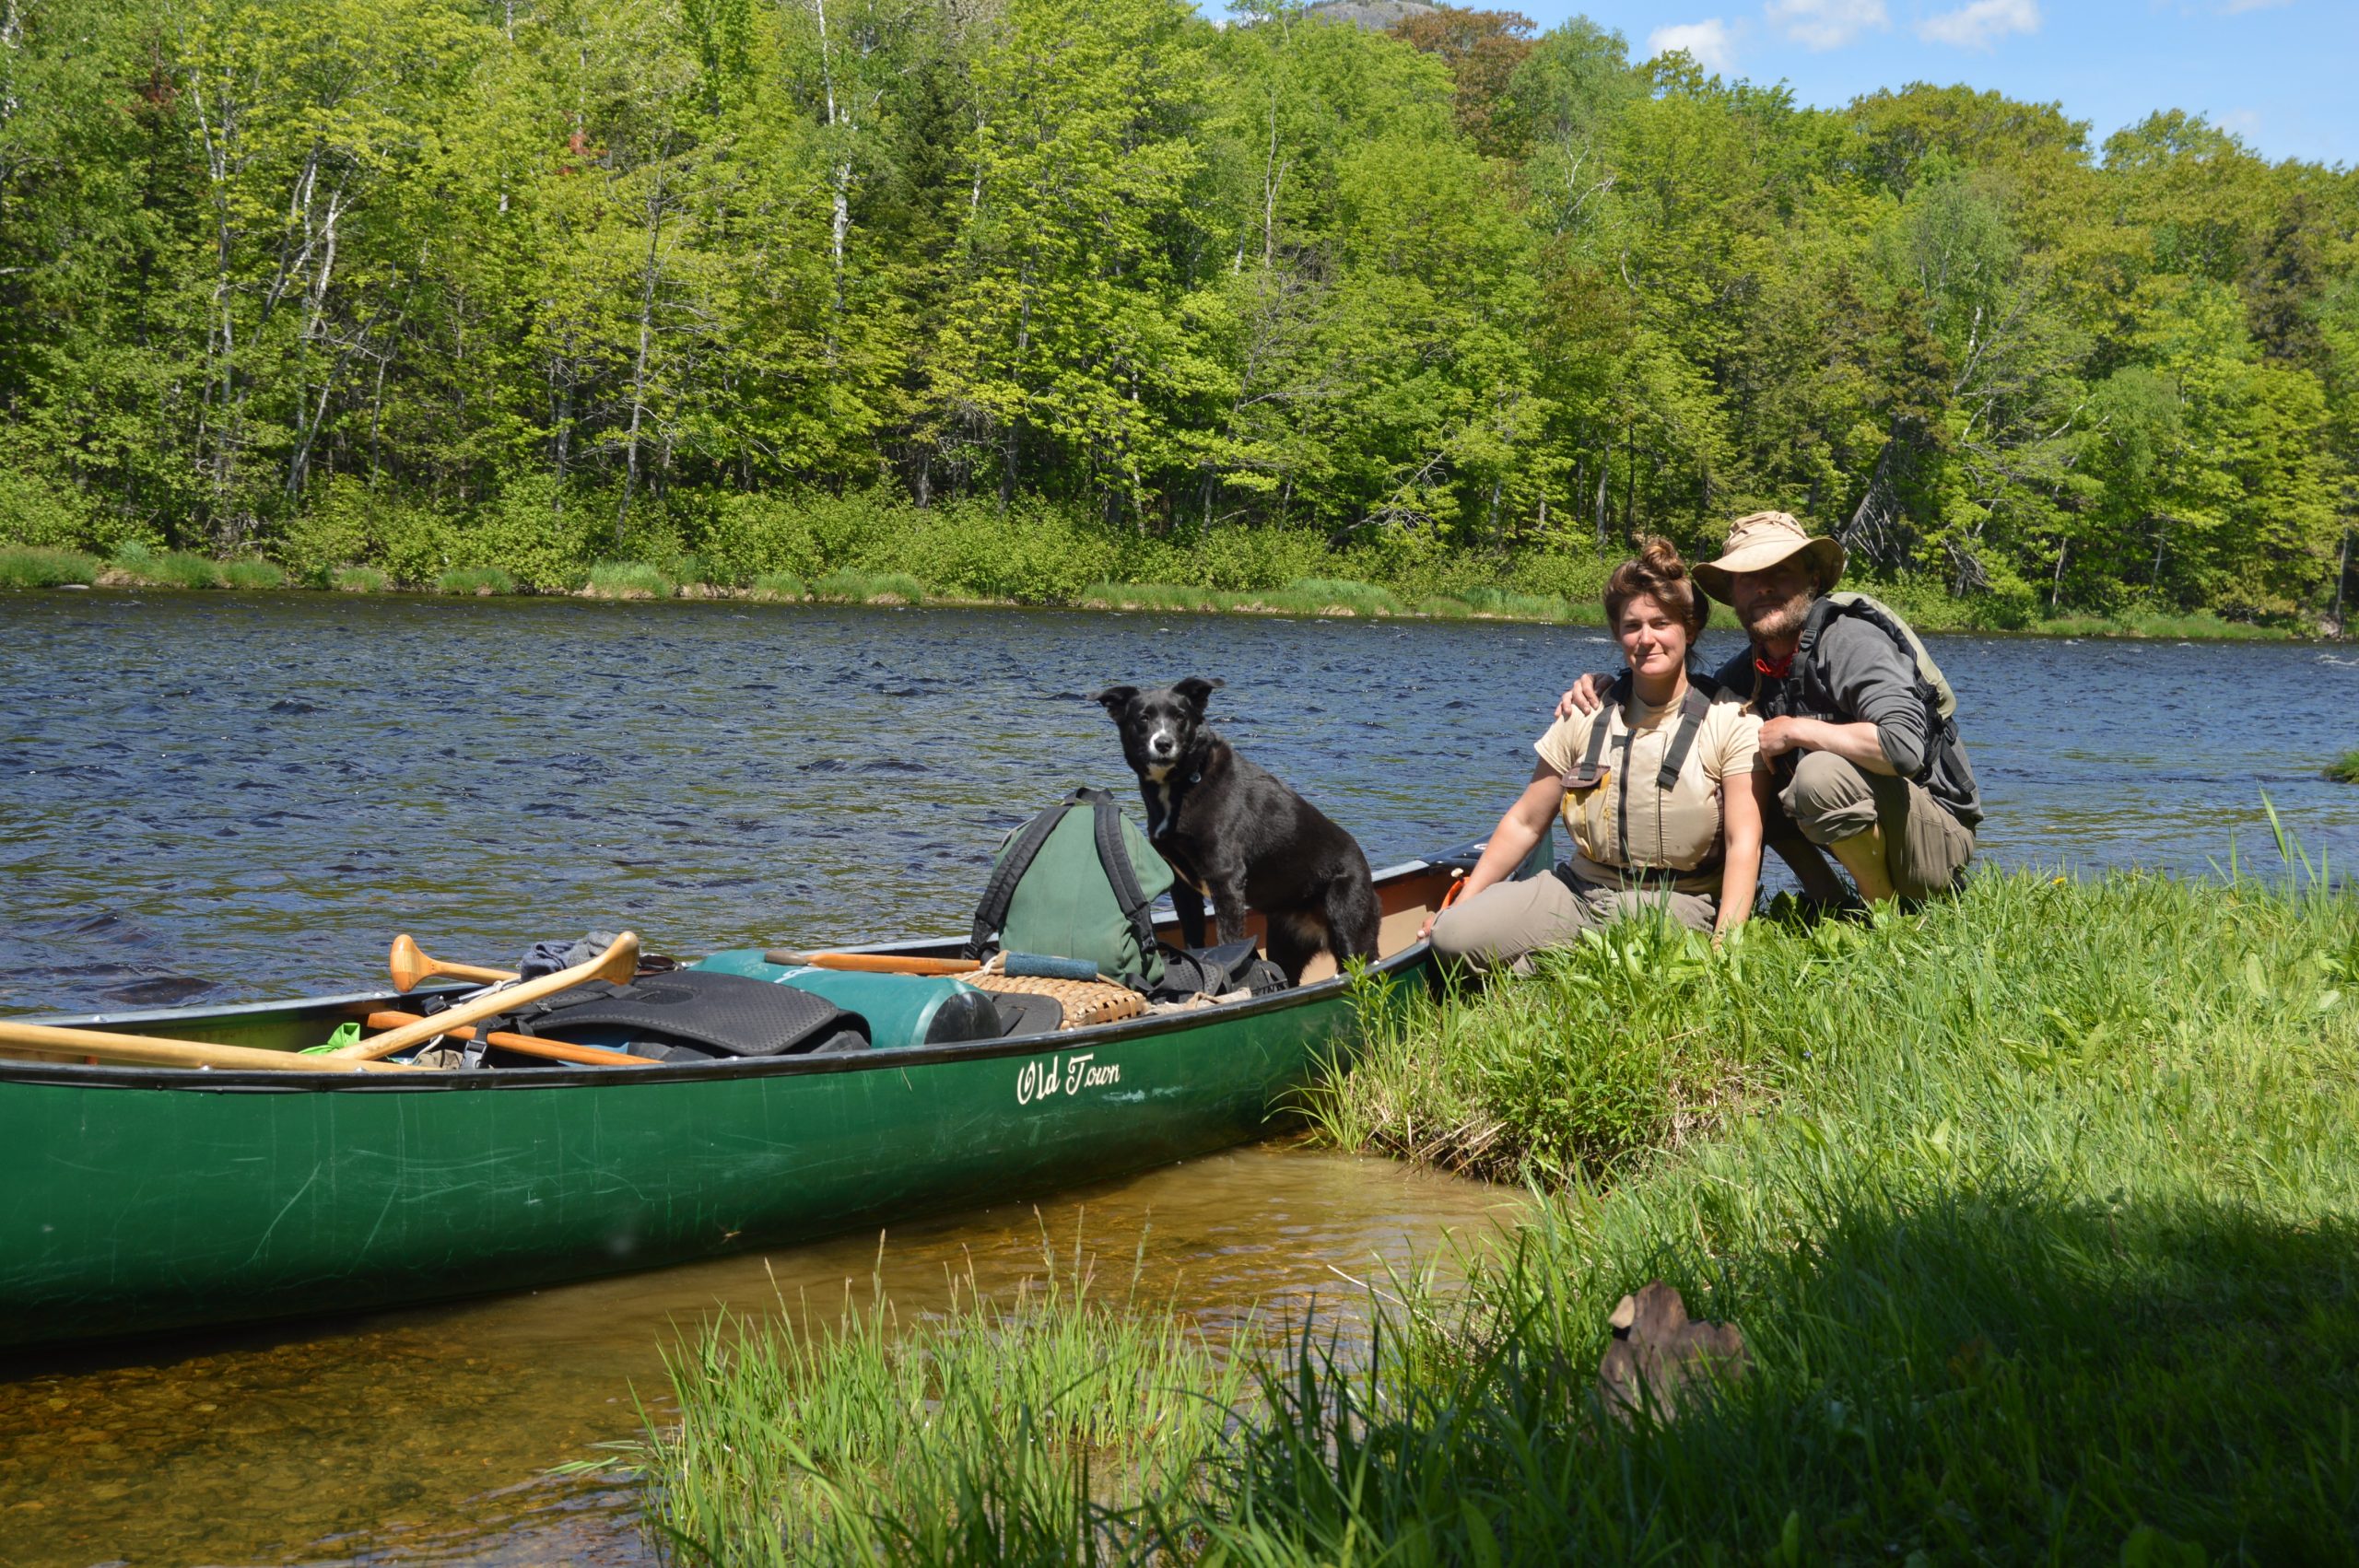 Coastal Mountains Nature Program talk – From Greenville to Belfast, a 300-mile Paddling Journey